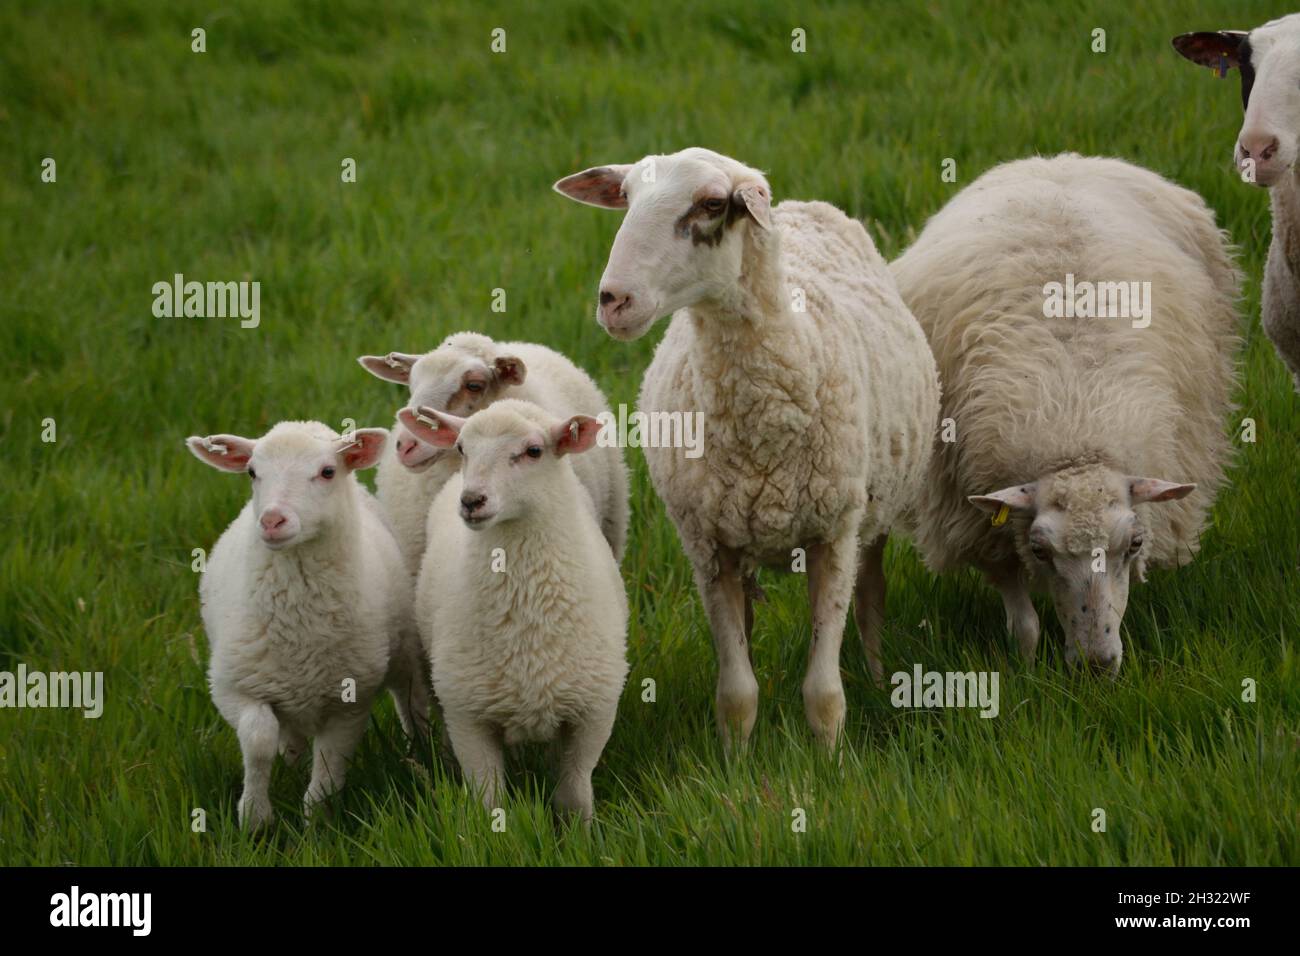 Curious Sheep And Her Lambs. Stock Photo